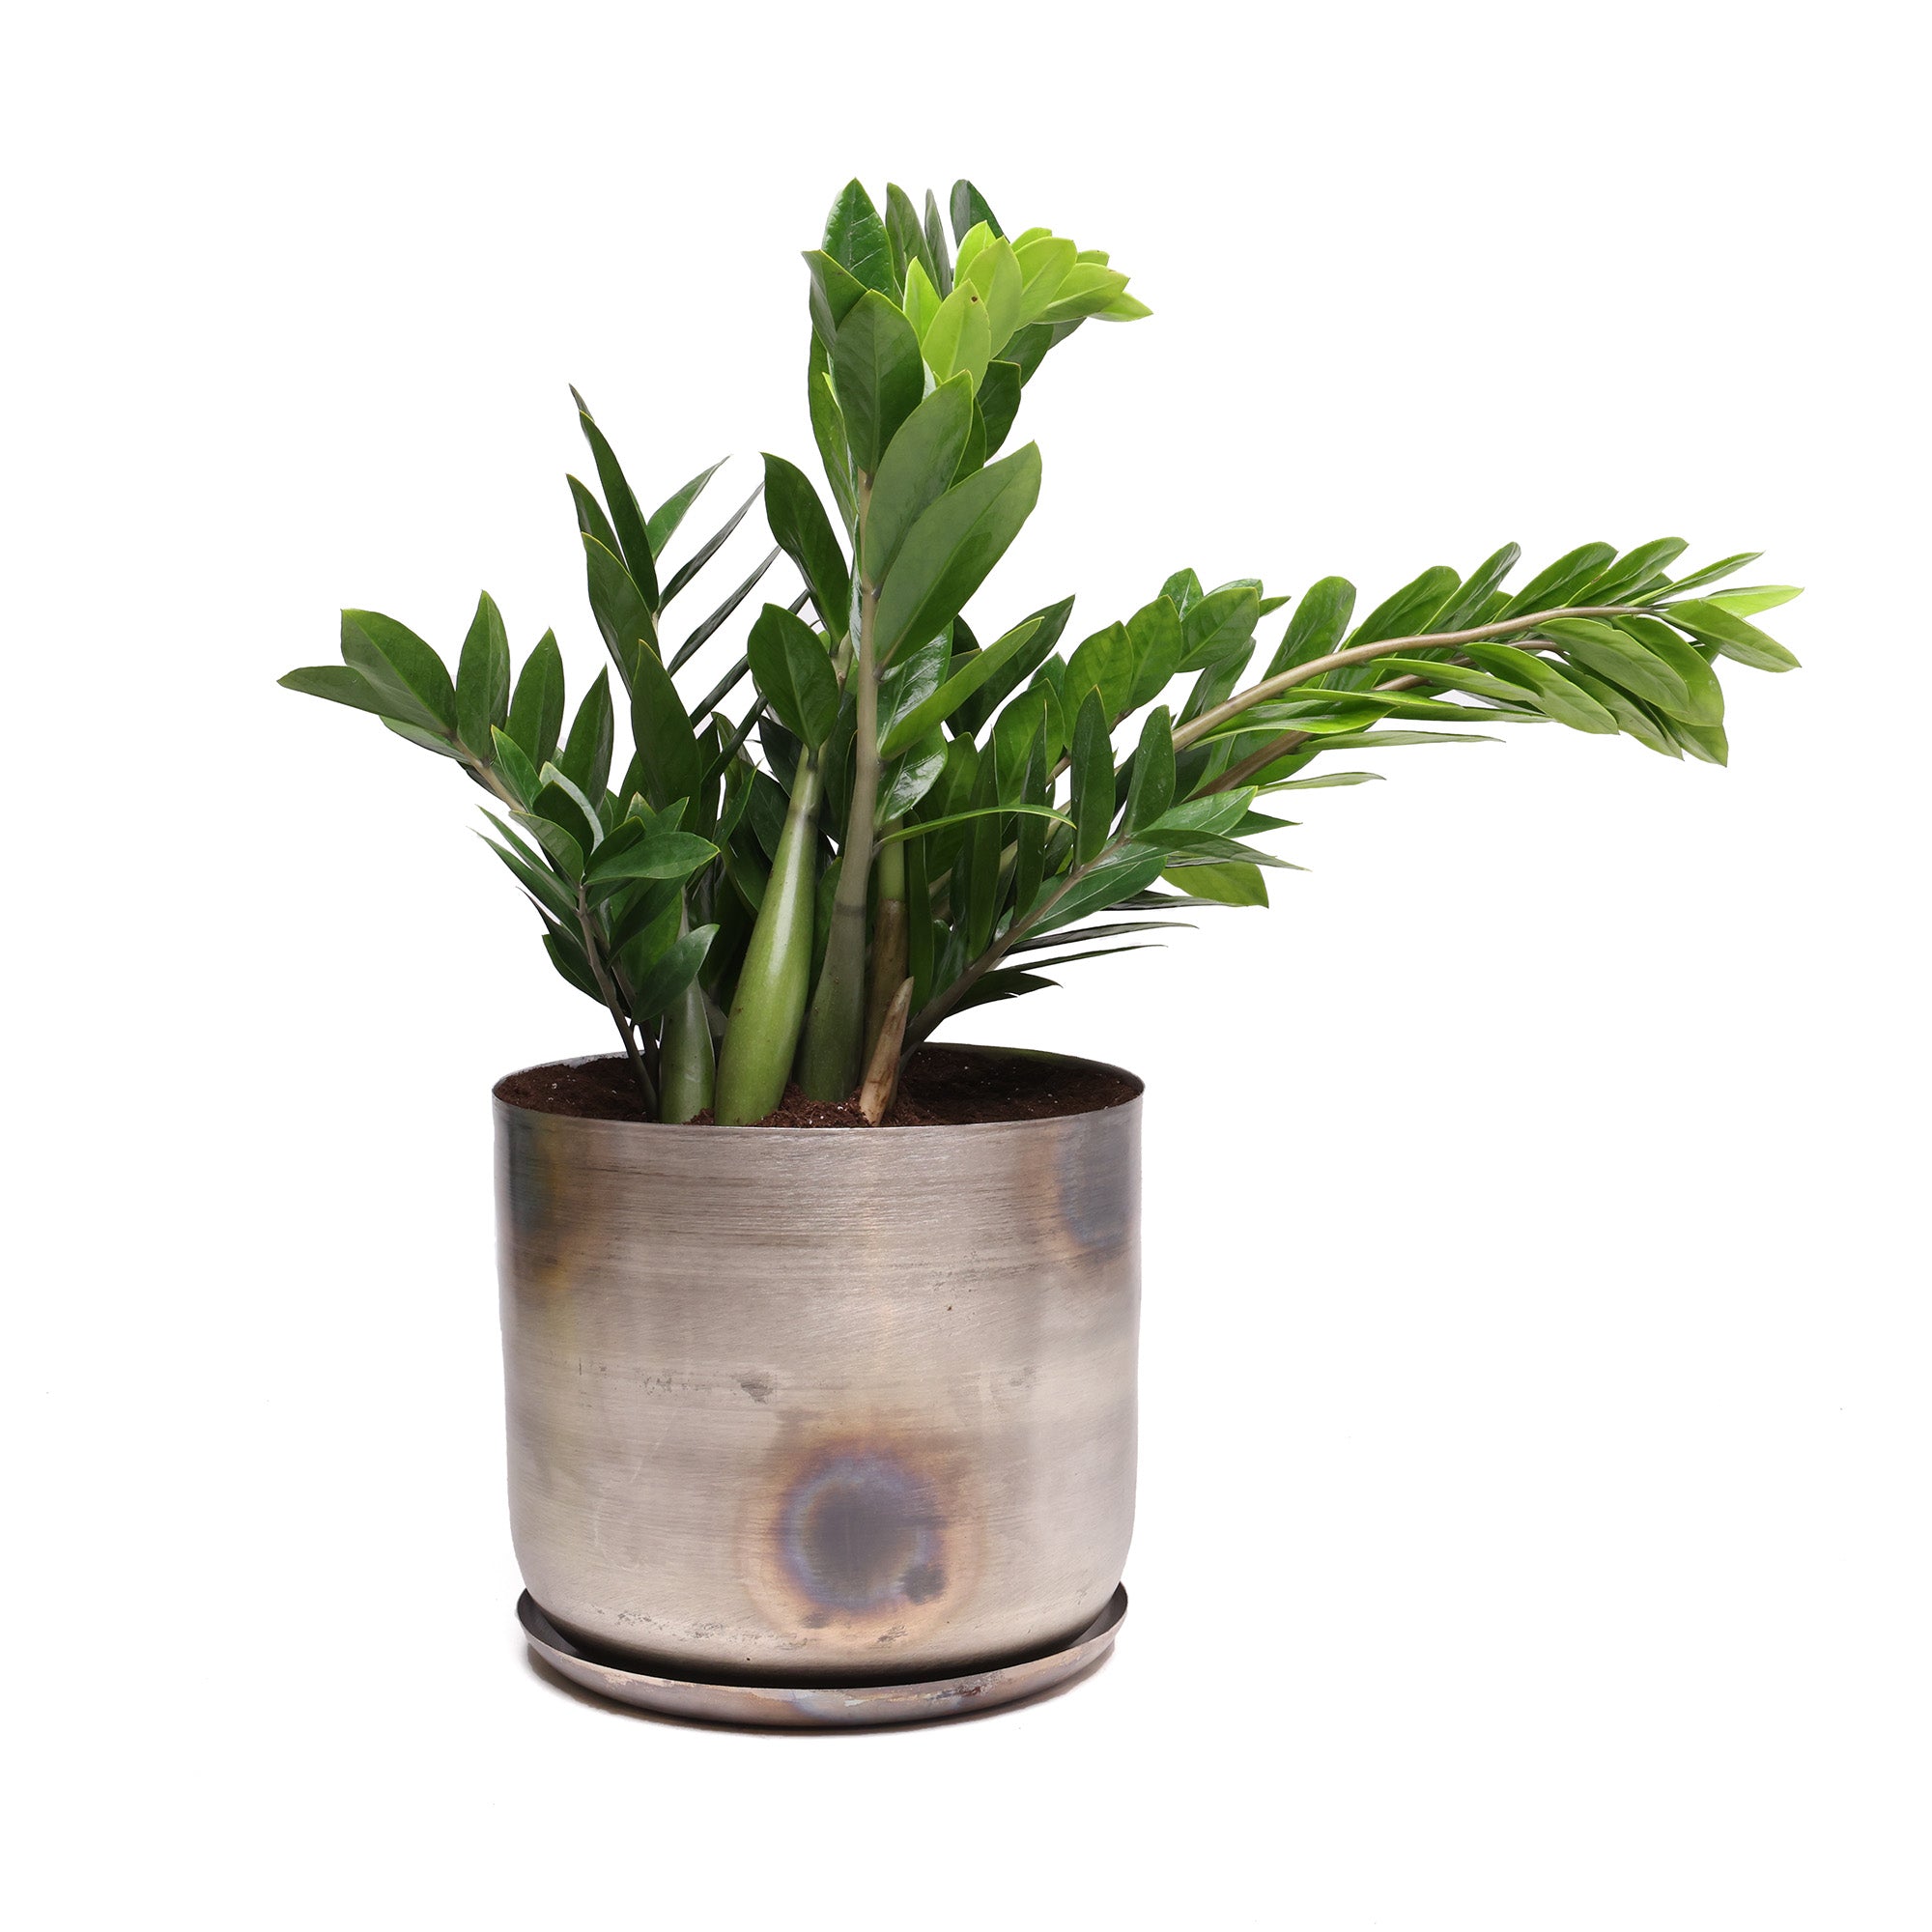 A lush green Potted ZZ Plant from Chive Studio, situated in a rustic 10” Joe Pot against a white background.